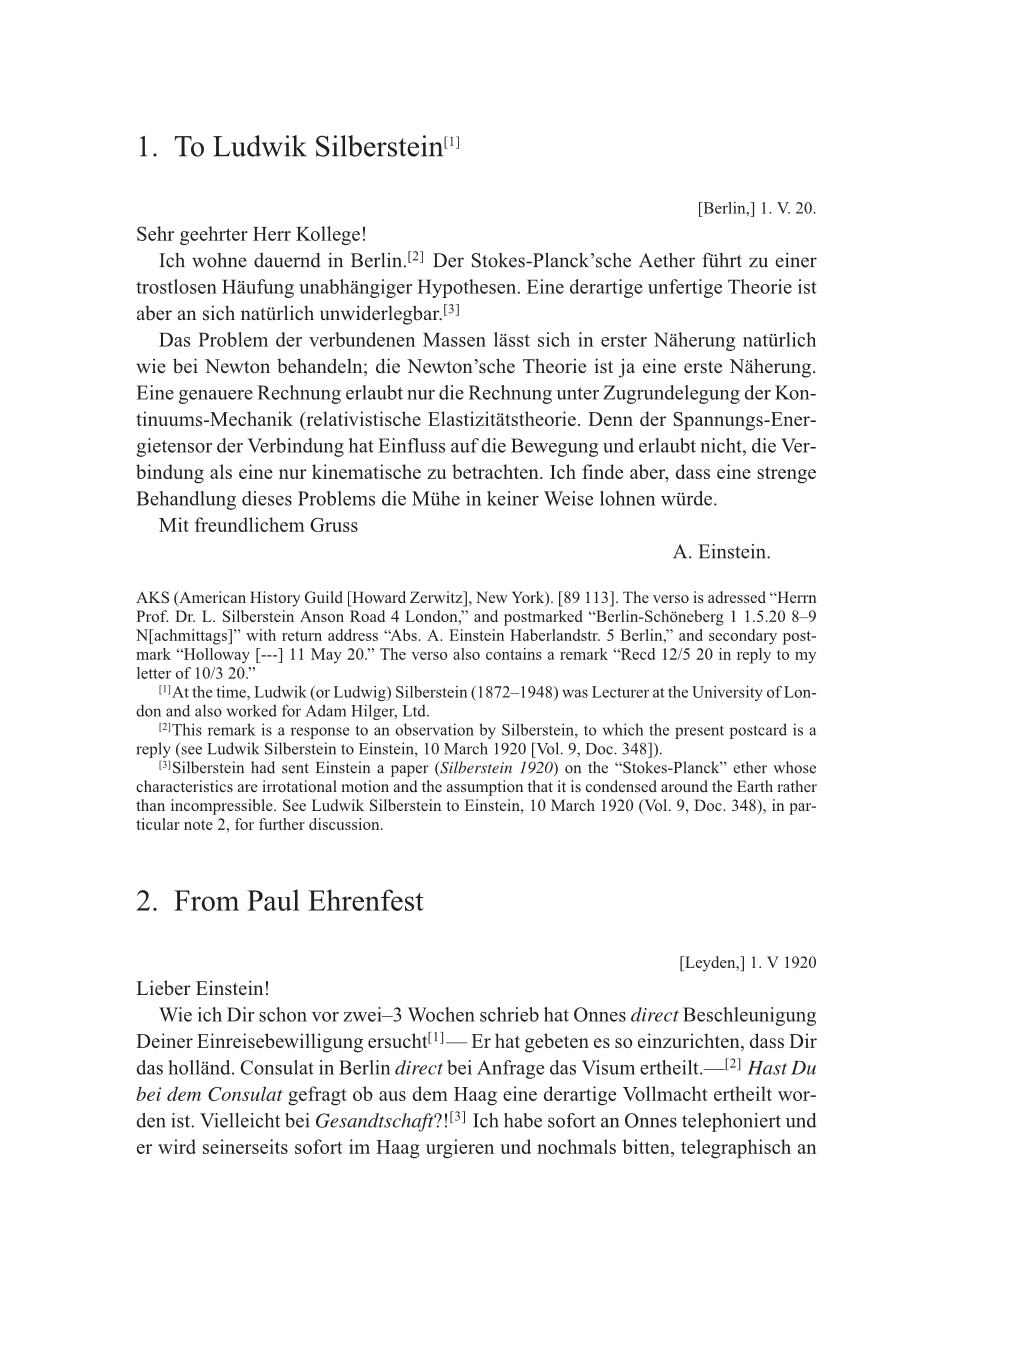 Volume 10: The Berlin Years: Correspondence May-December 1920 / Supplementary Correspondence 1909-1920 page 241